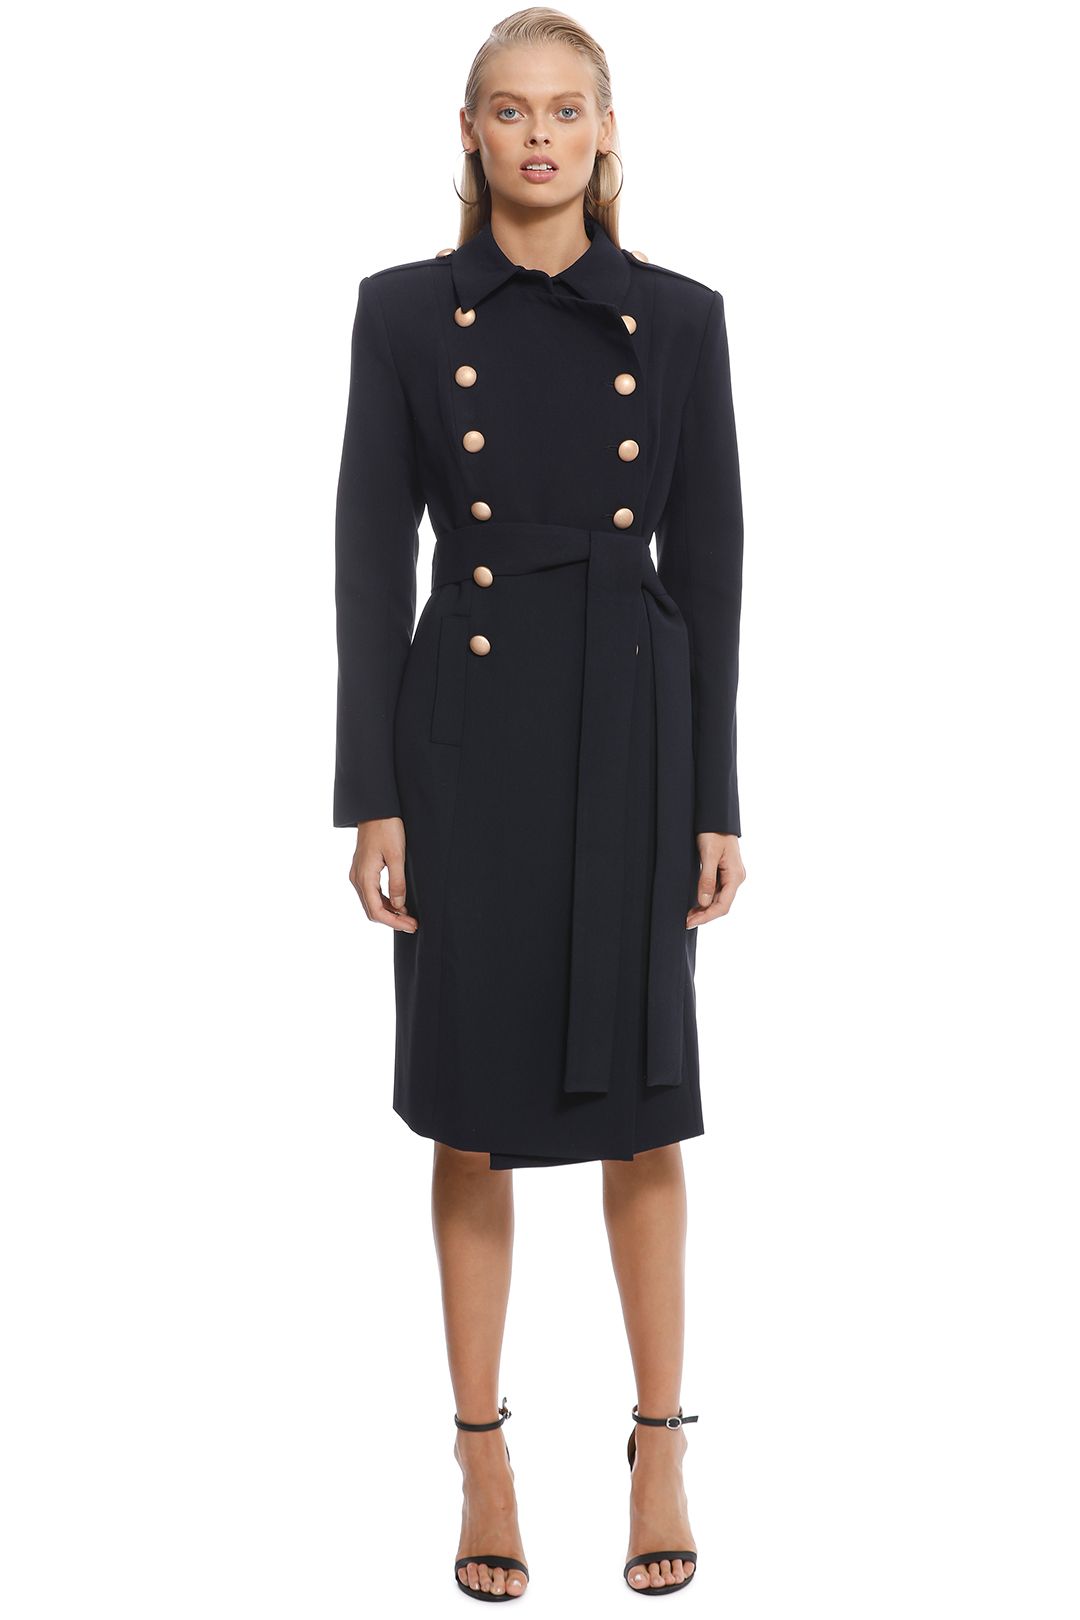 Misha Collection - Andrea Coat – Navy - Front